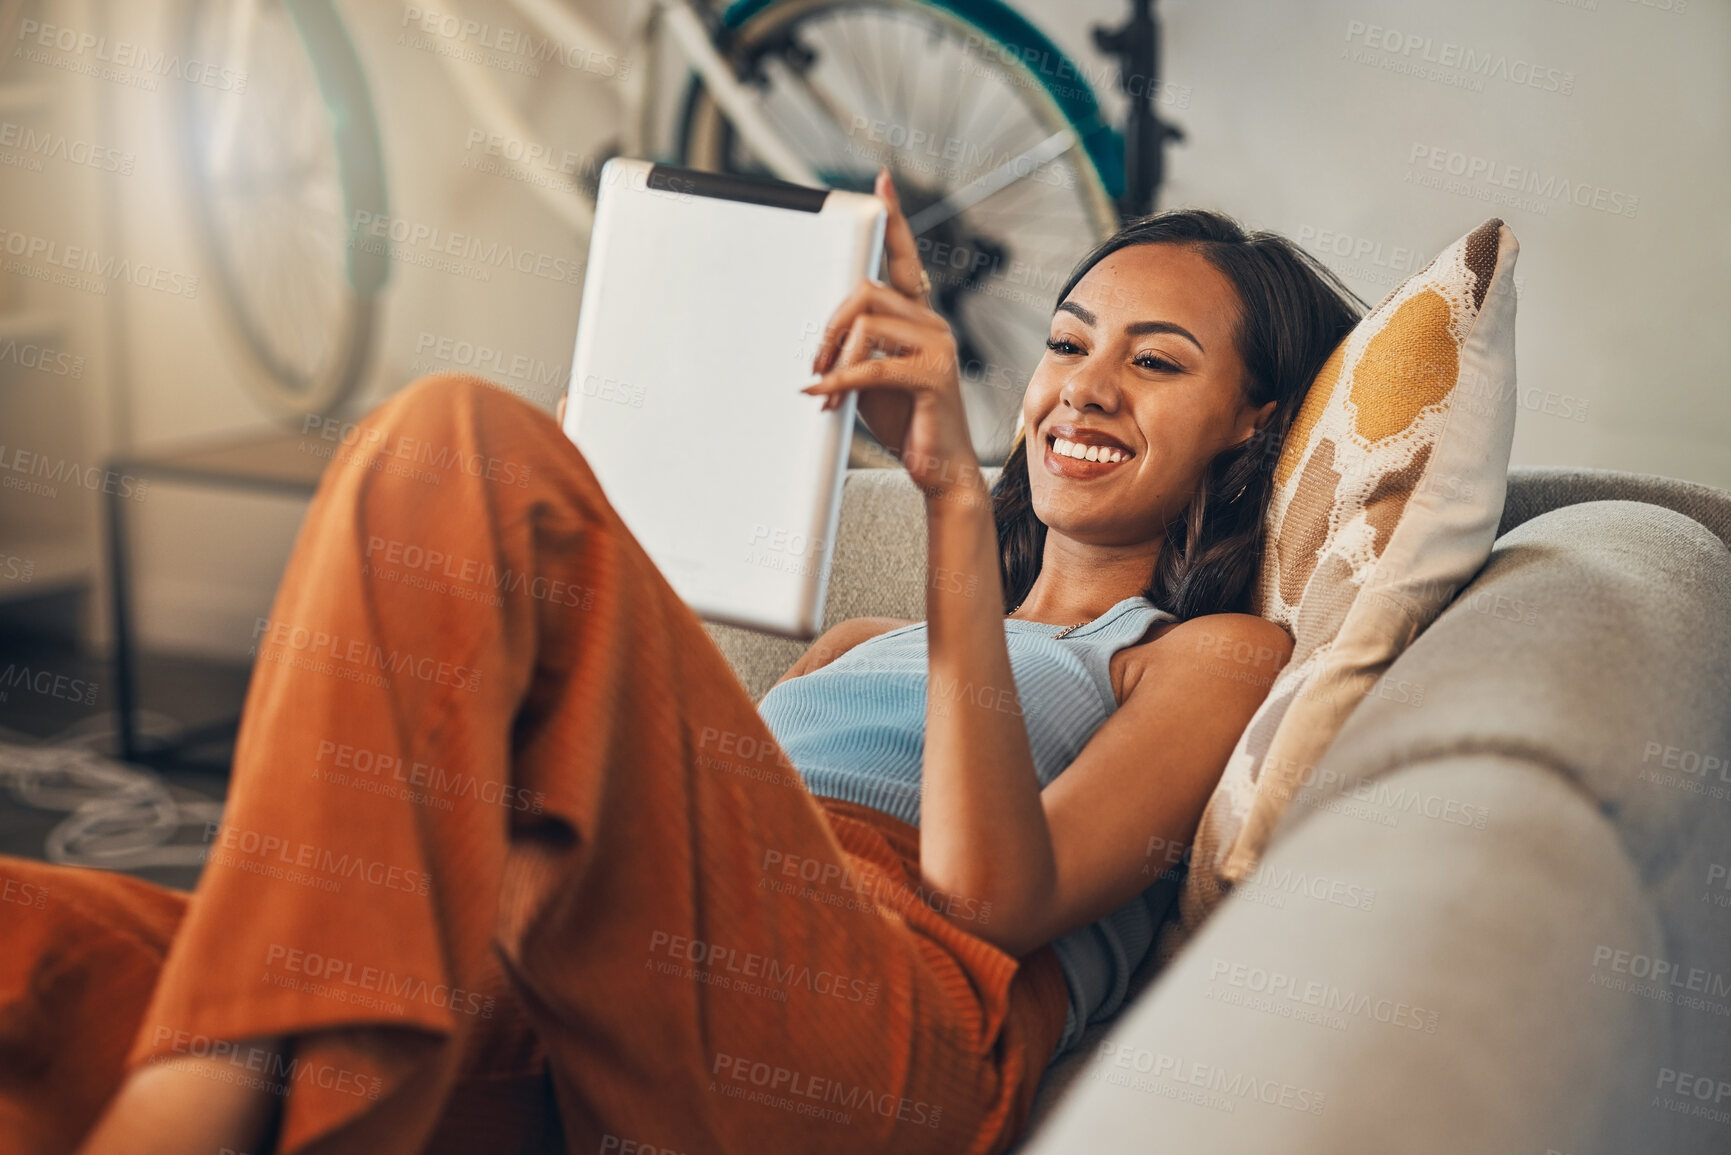 Buy stock photo Smiling mixed race woman browsing internet on digital tablet at home. Happy hispanic lying down on living room sofa alone and using technology. Relaxed woman scrolling and searching online on weekend